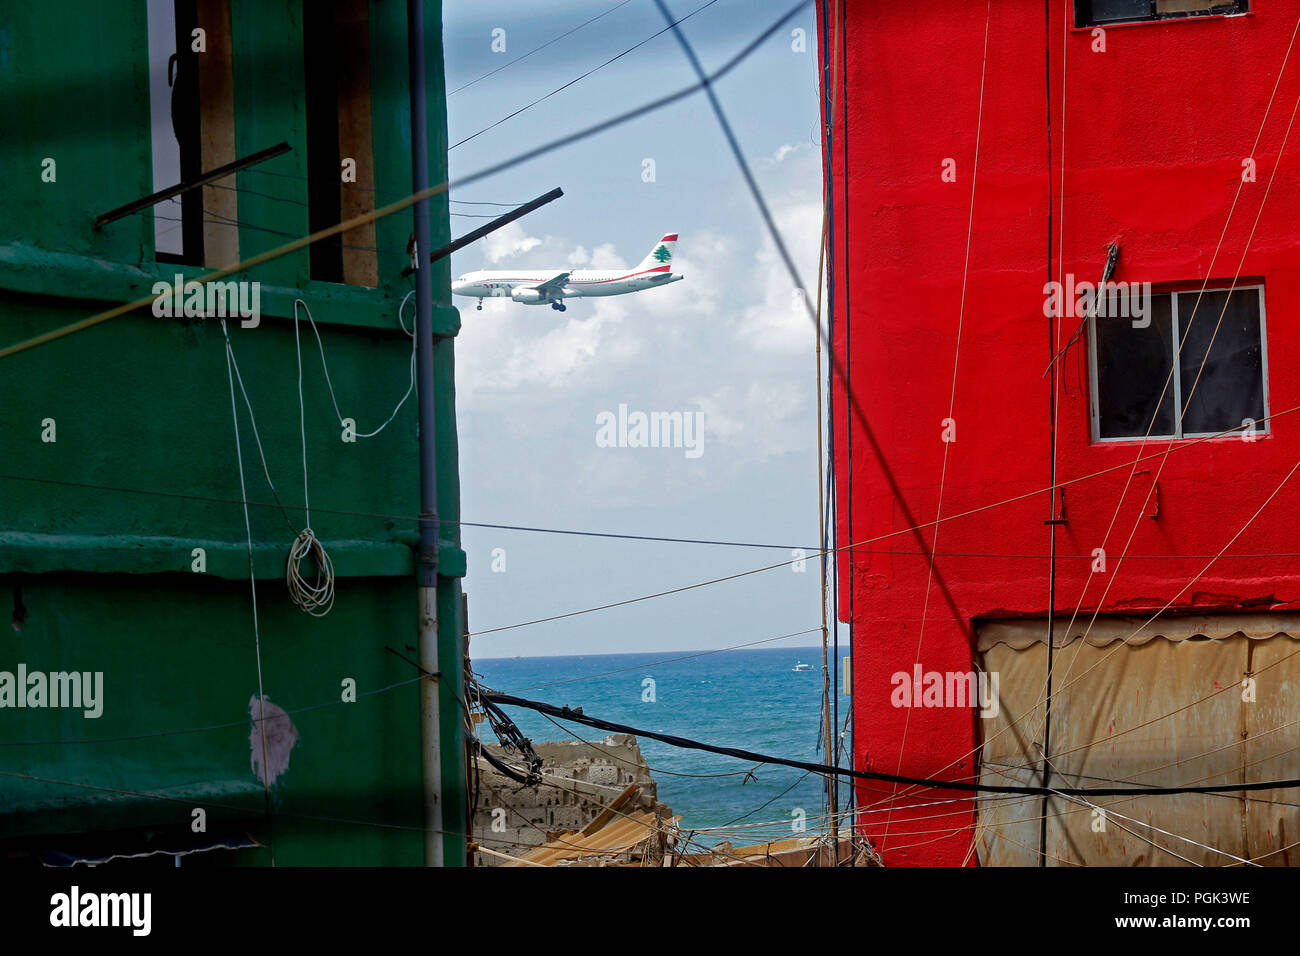 Ouzai, Lebanon. 26th Aug, 2018. A plane flies by buildings with colorful paintings in Ouzai, south of Beirut, Lebanon, on Aug. 26, 2018. Credit: Bilal Jawich/Xinhua/Alamy Live News Stock Photo